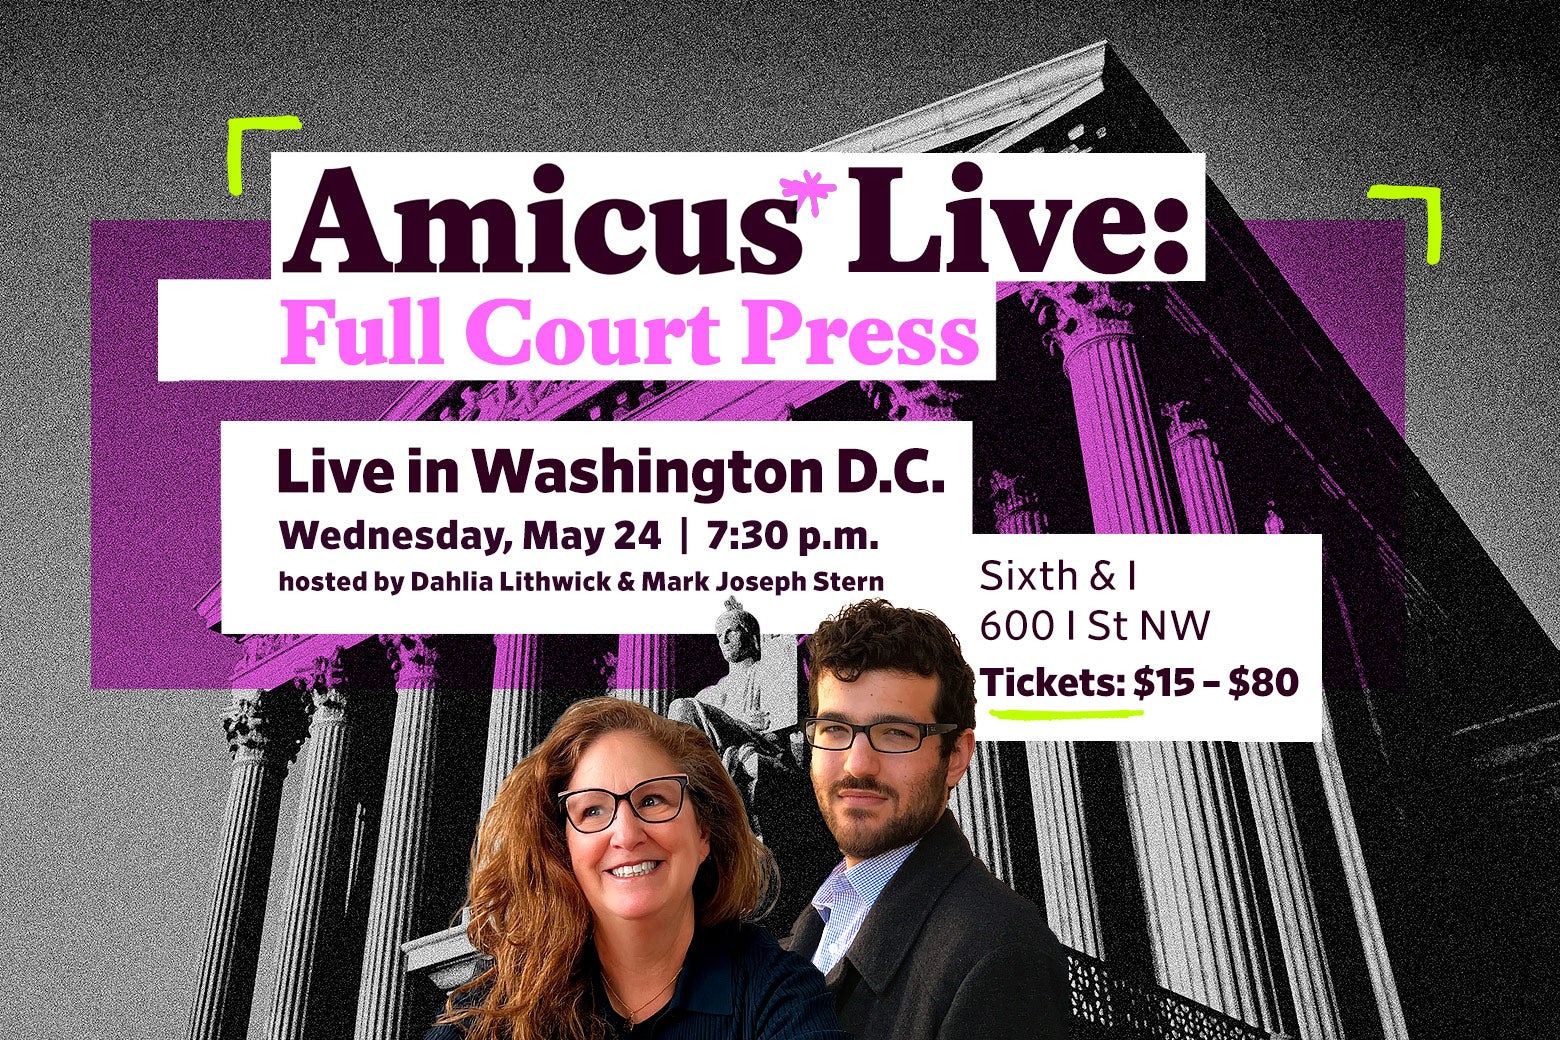 An advertisement for Amicus Live: Full Court Press at Sixth & I in Washington D.C.